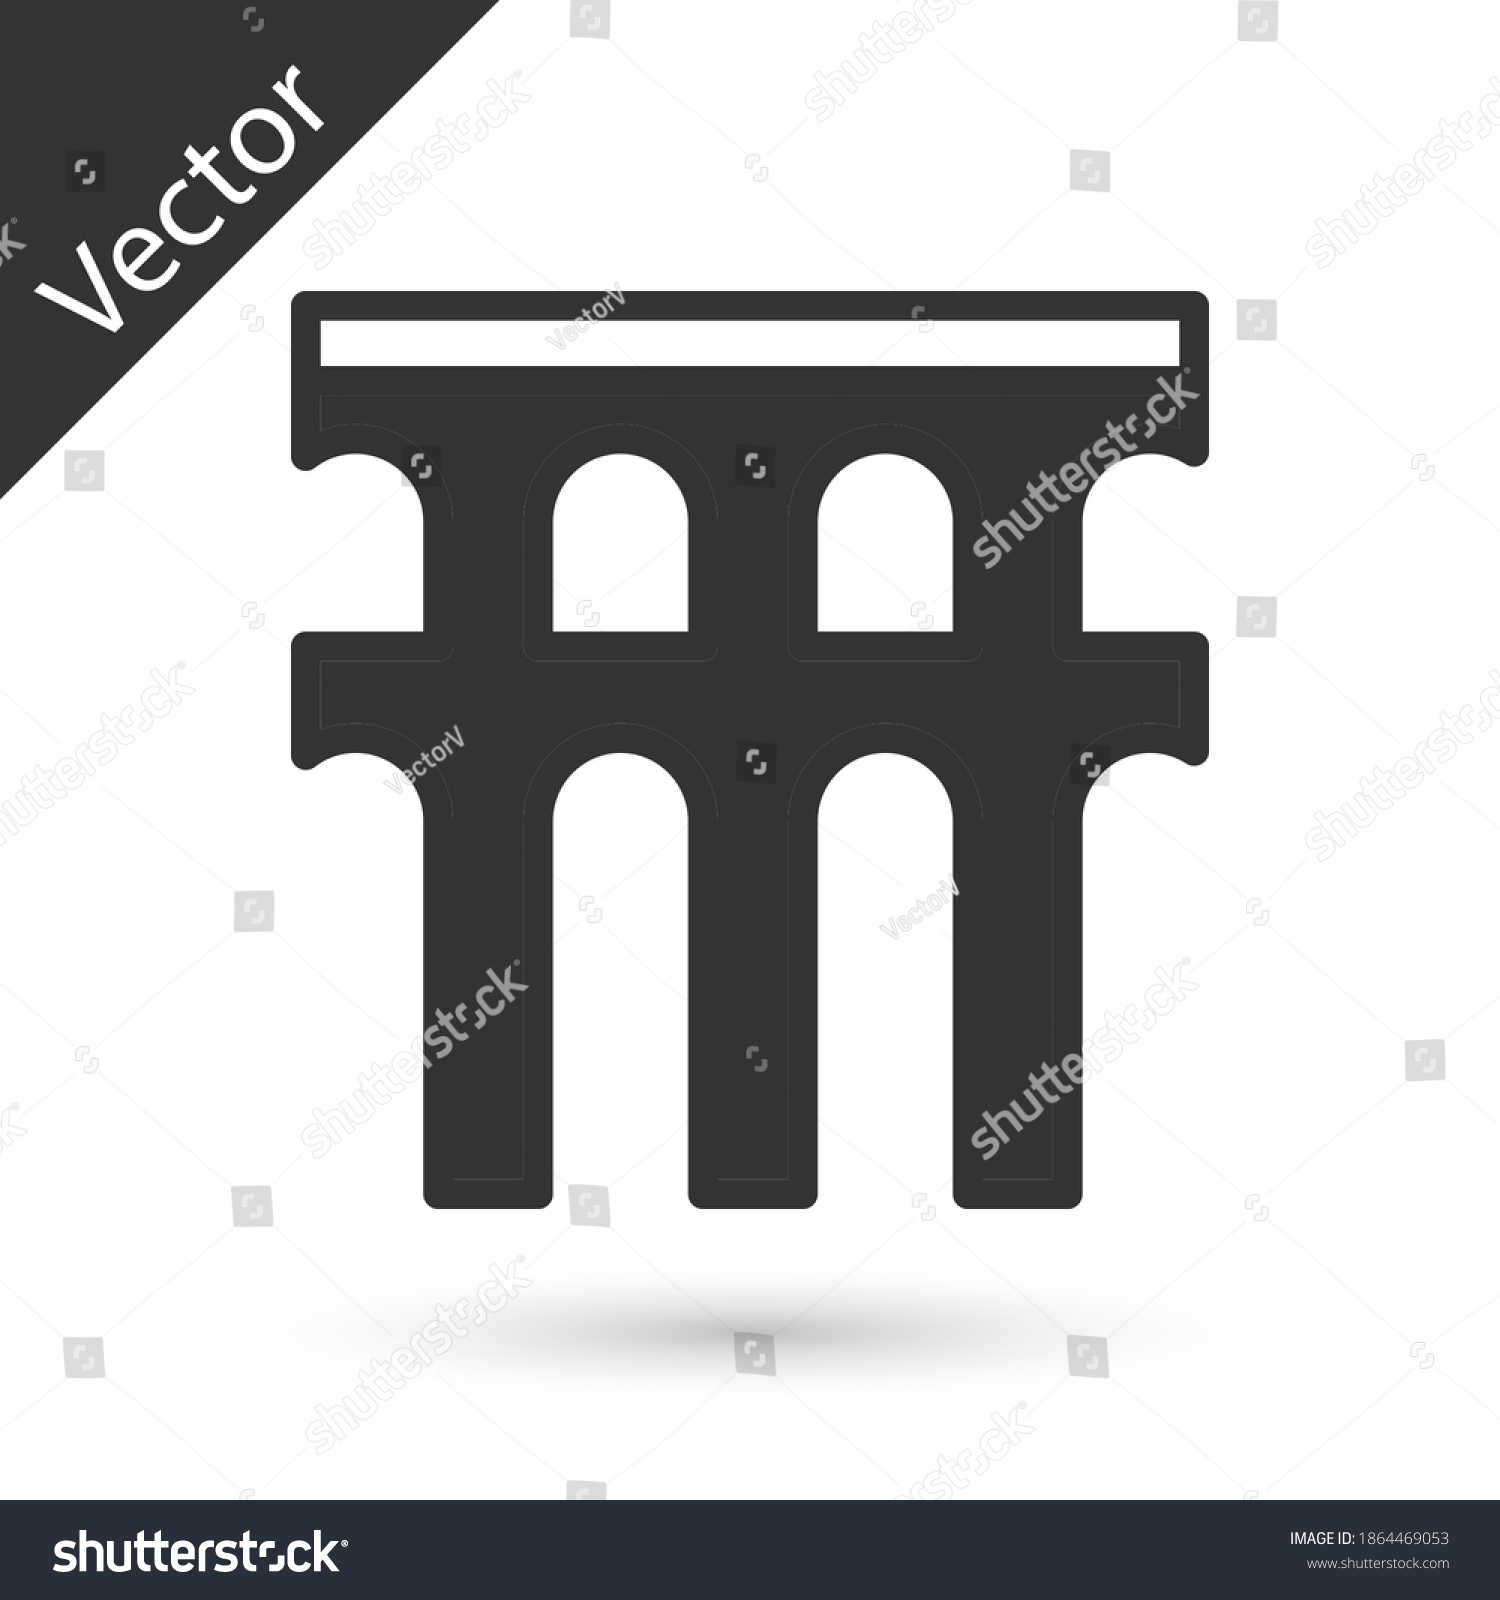 SVG of Grey Aqueduct of Segovia, Spain icon isolated on white background. Roman Aqueduct building. National symbol of Spain. Vector. svg